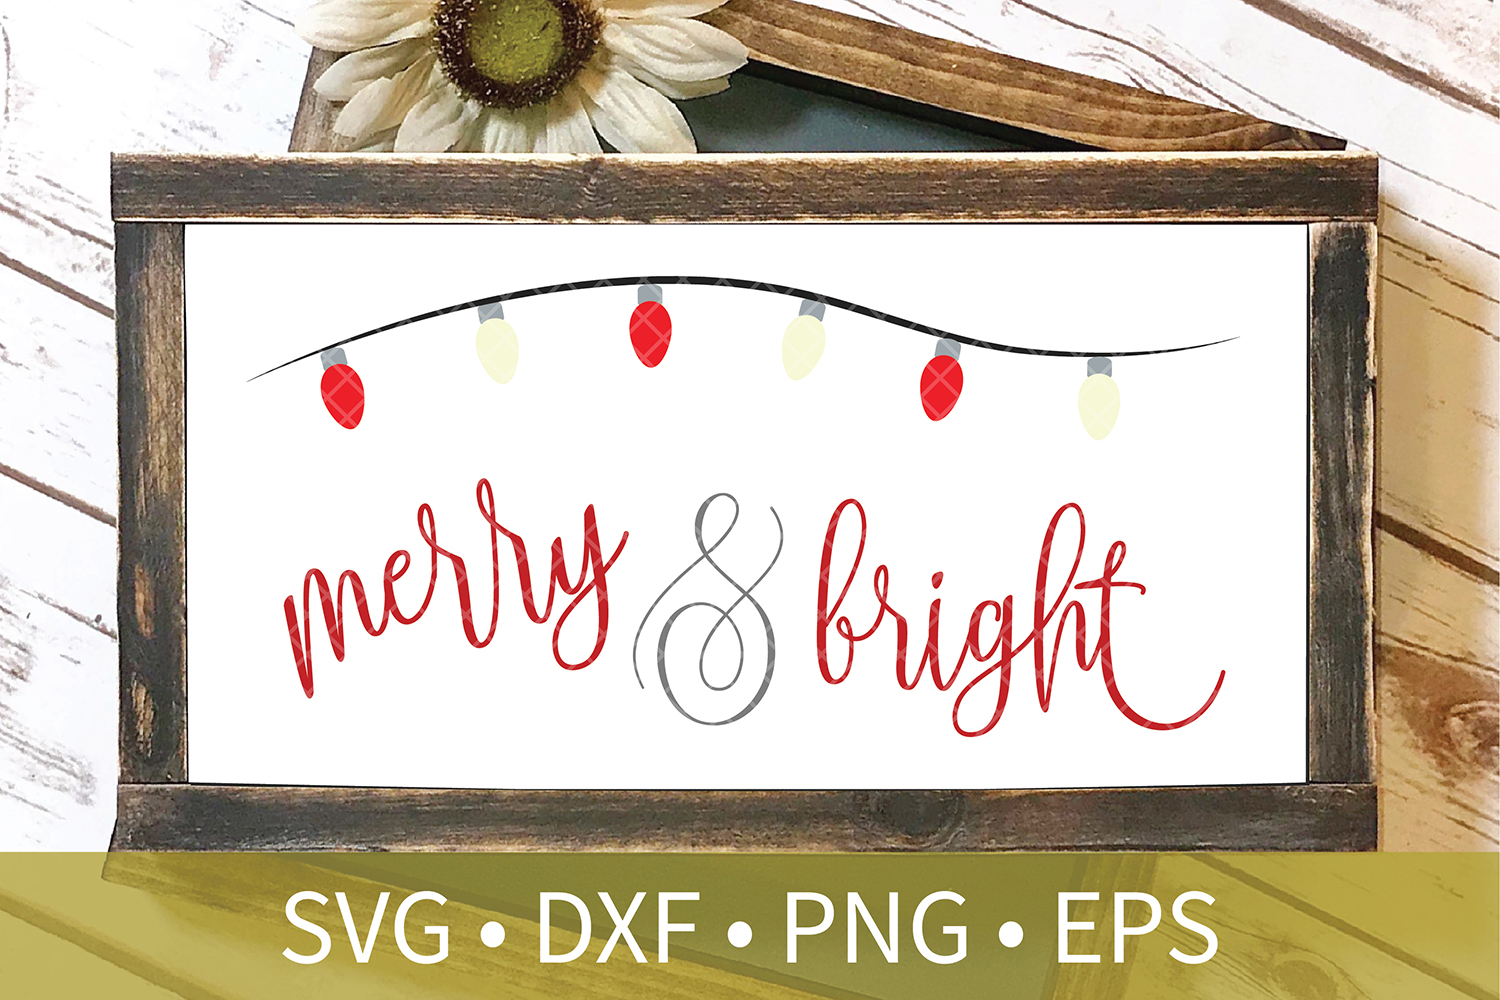 Download Merry and Bright Christmas Lights Sign SVG PNG DXF Cut ...